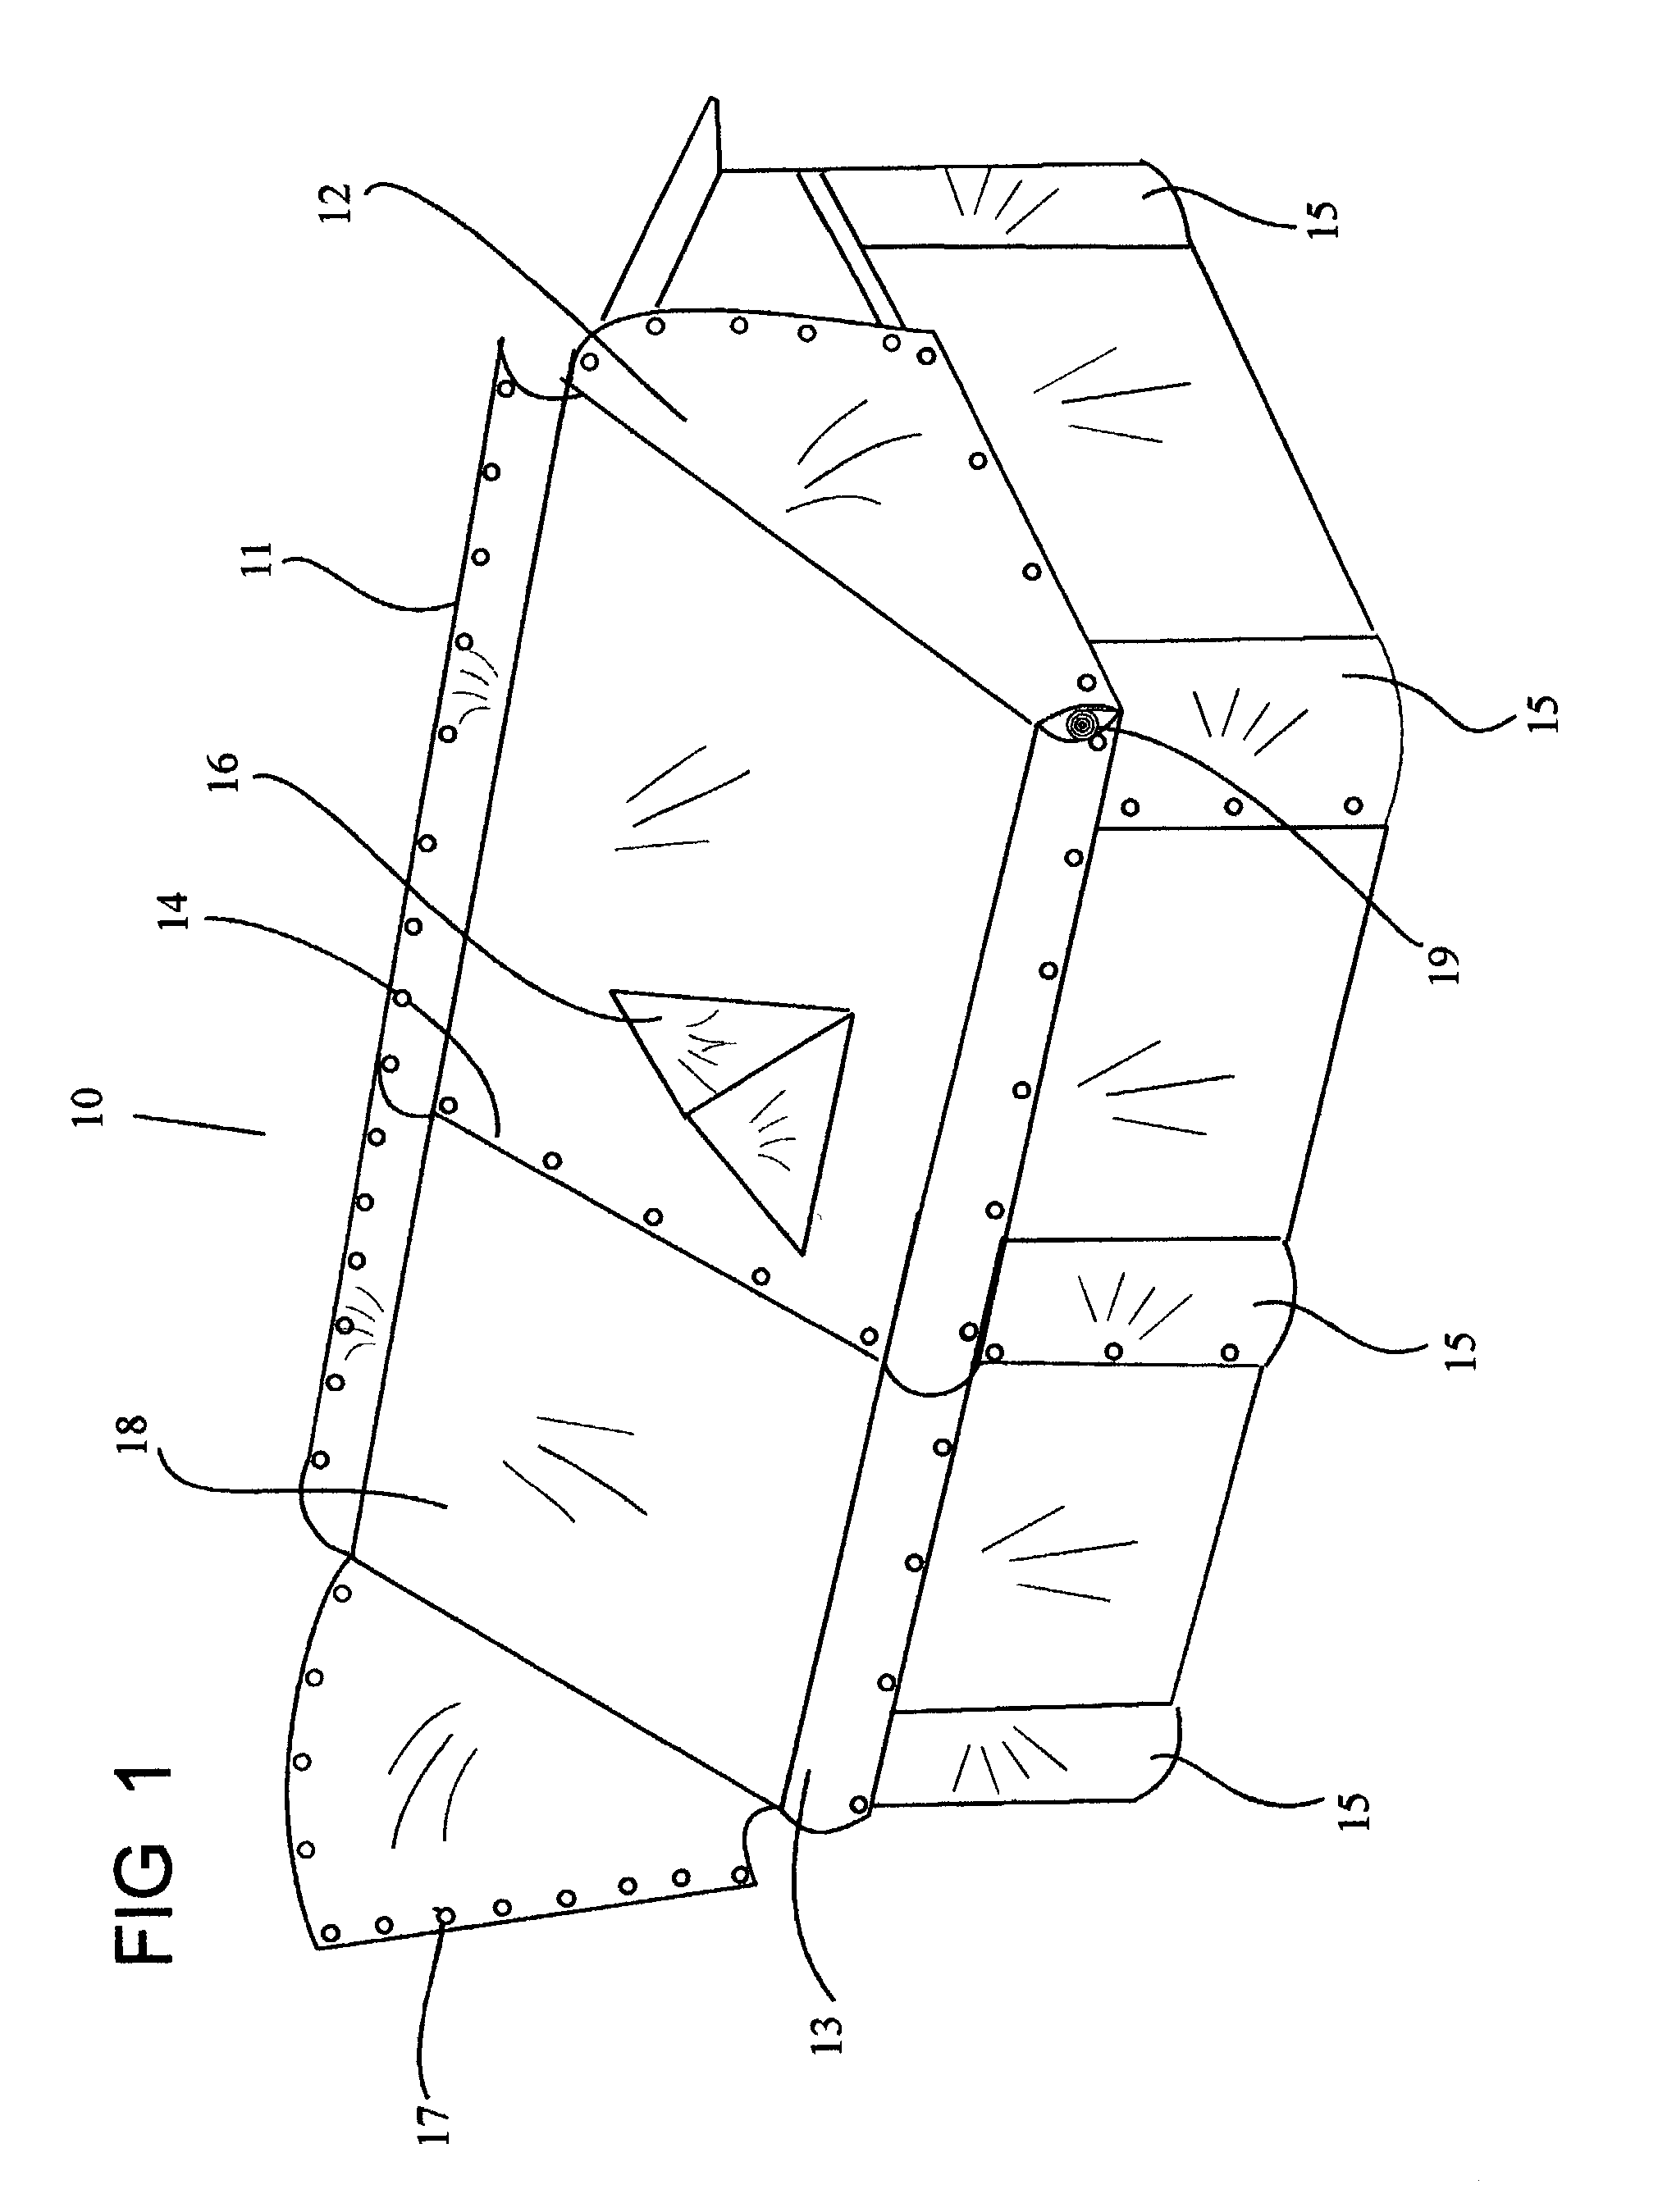 Fire protection cover apparatus for structures